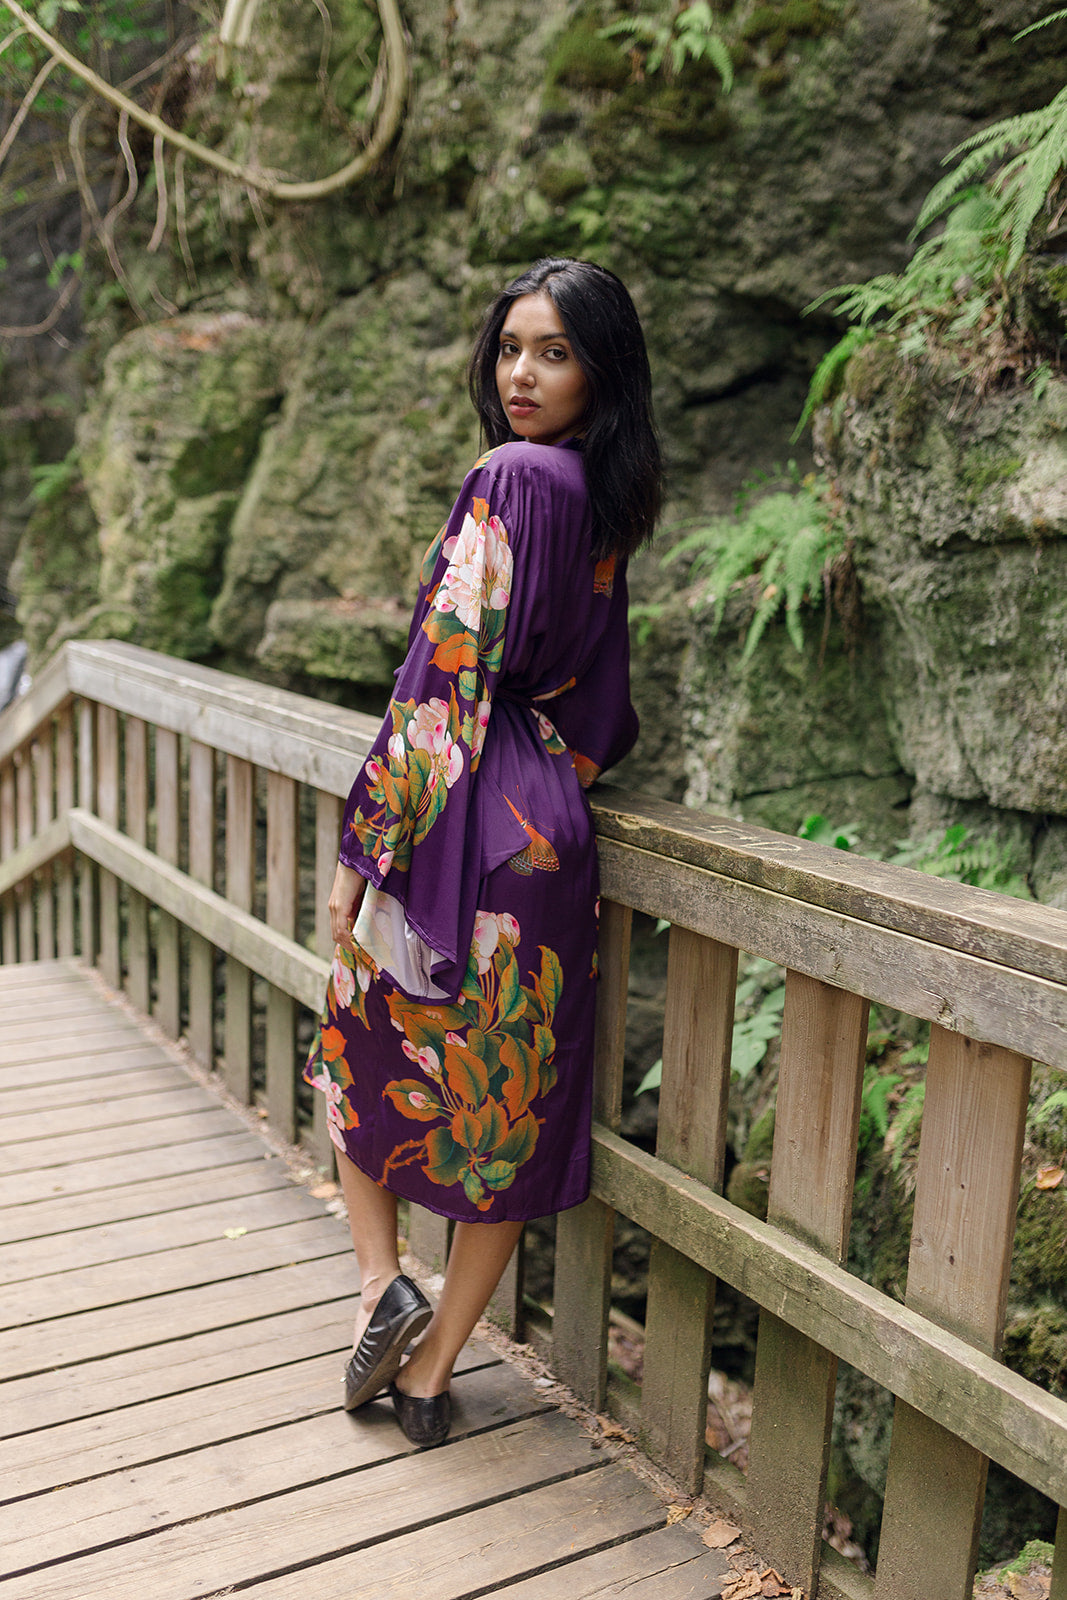 Women's long robe with purple floral and butterfly design, women looking over shoulder wearing ballet flats, with cliff rock hiking and mountains in background